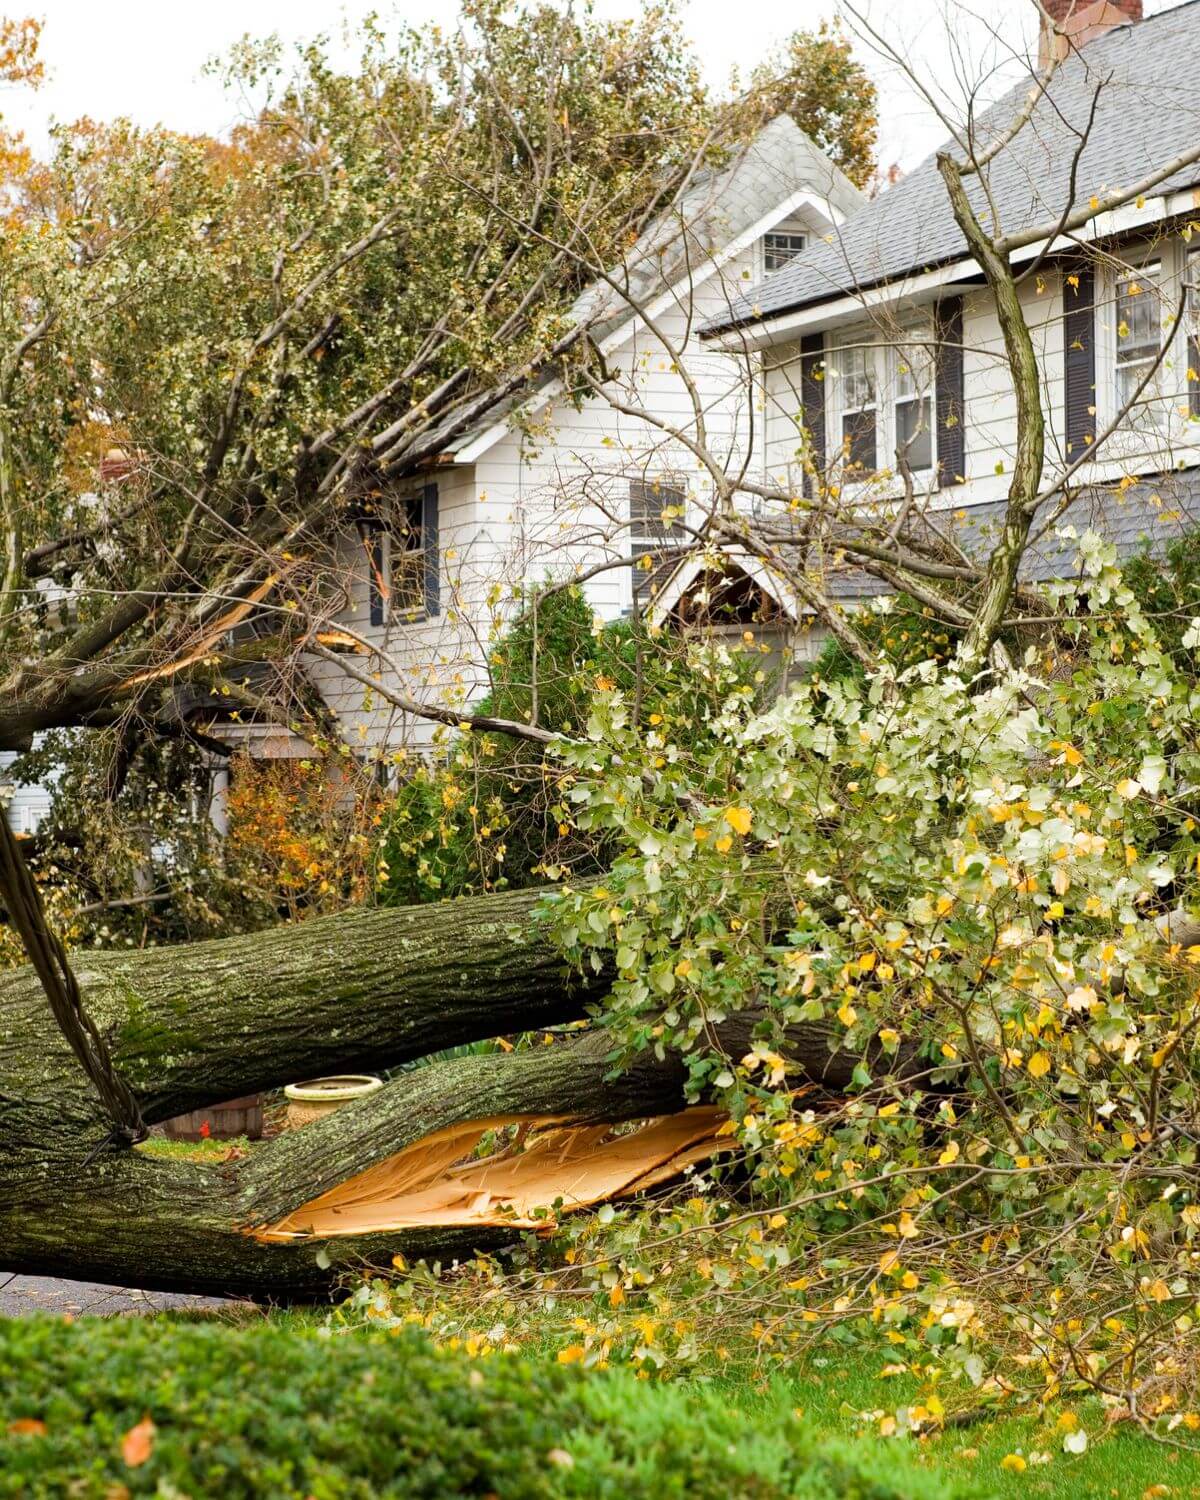 insurance housing solutions for disasters or other home emergencies